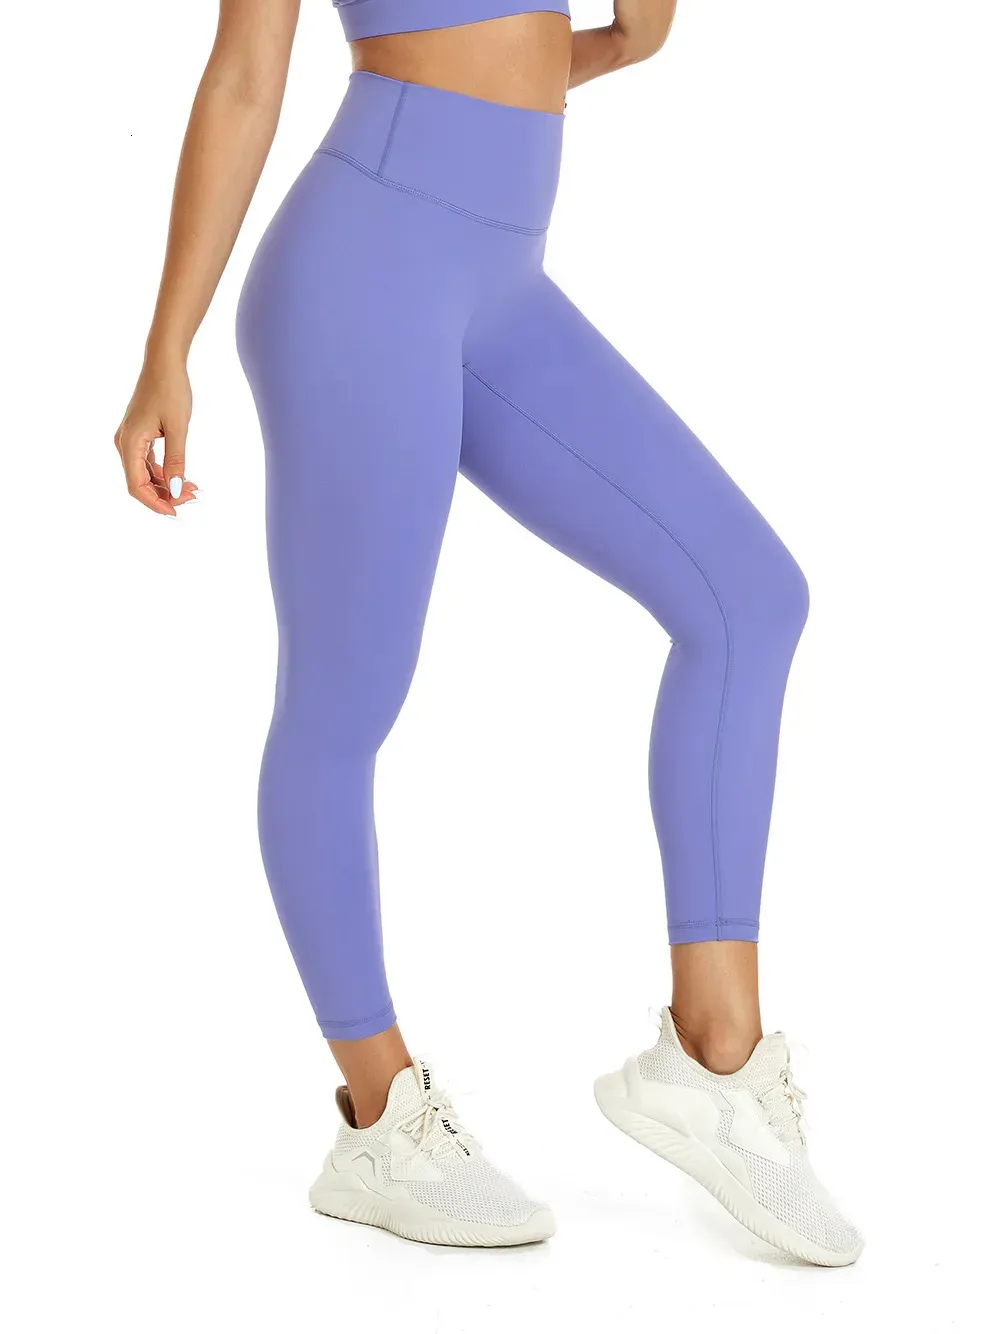 Nepoagym 25 RHYTHM Squat Proof Yoga  Gym Leggings No Front Seam,  Buttery Soft Fabric For Womens Gym, Sports, And Fitness Outfit 231011 From  Bai07, $19.81